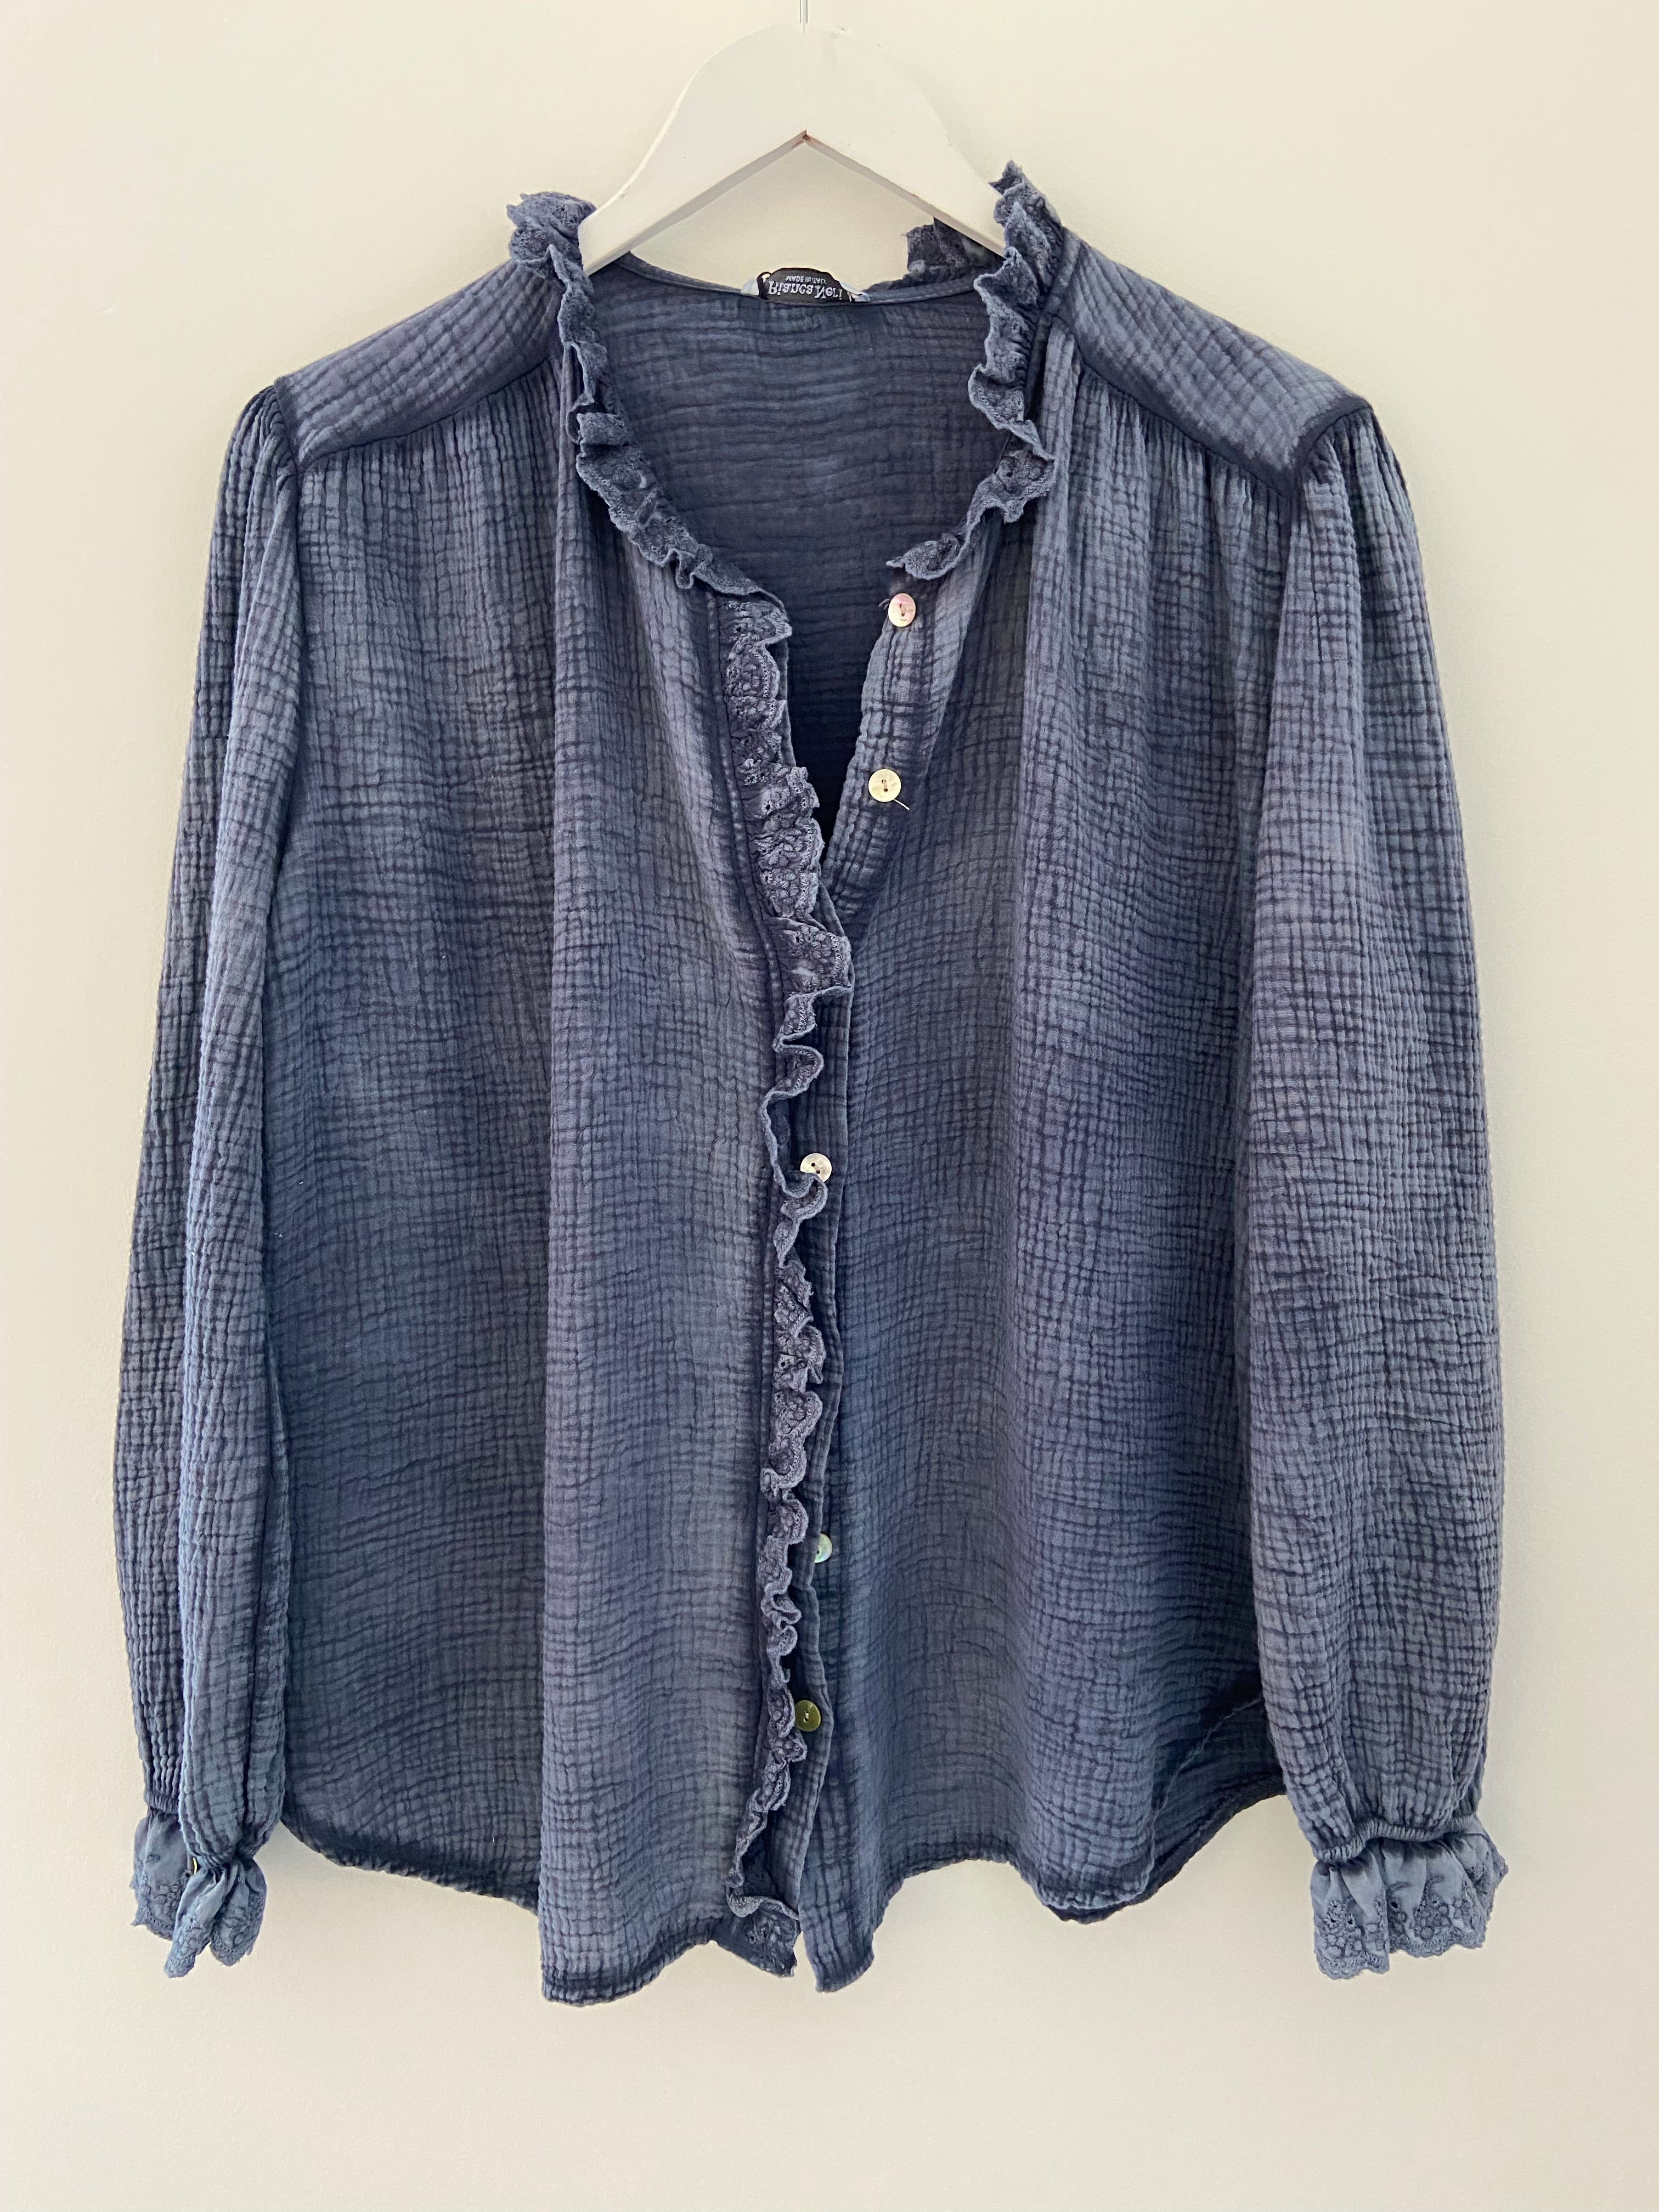 Cheesecloth Shirt in Smoky Blue